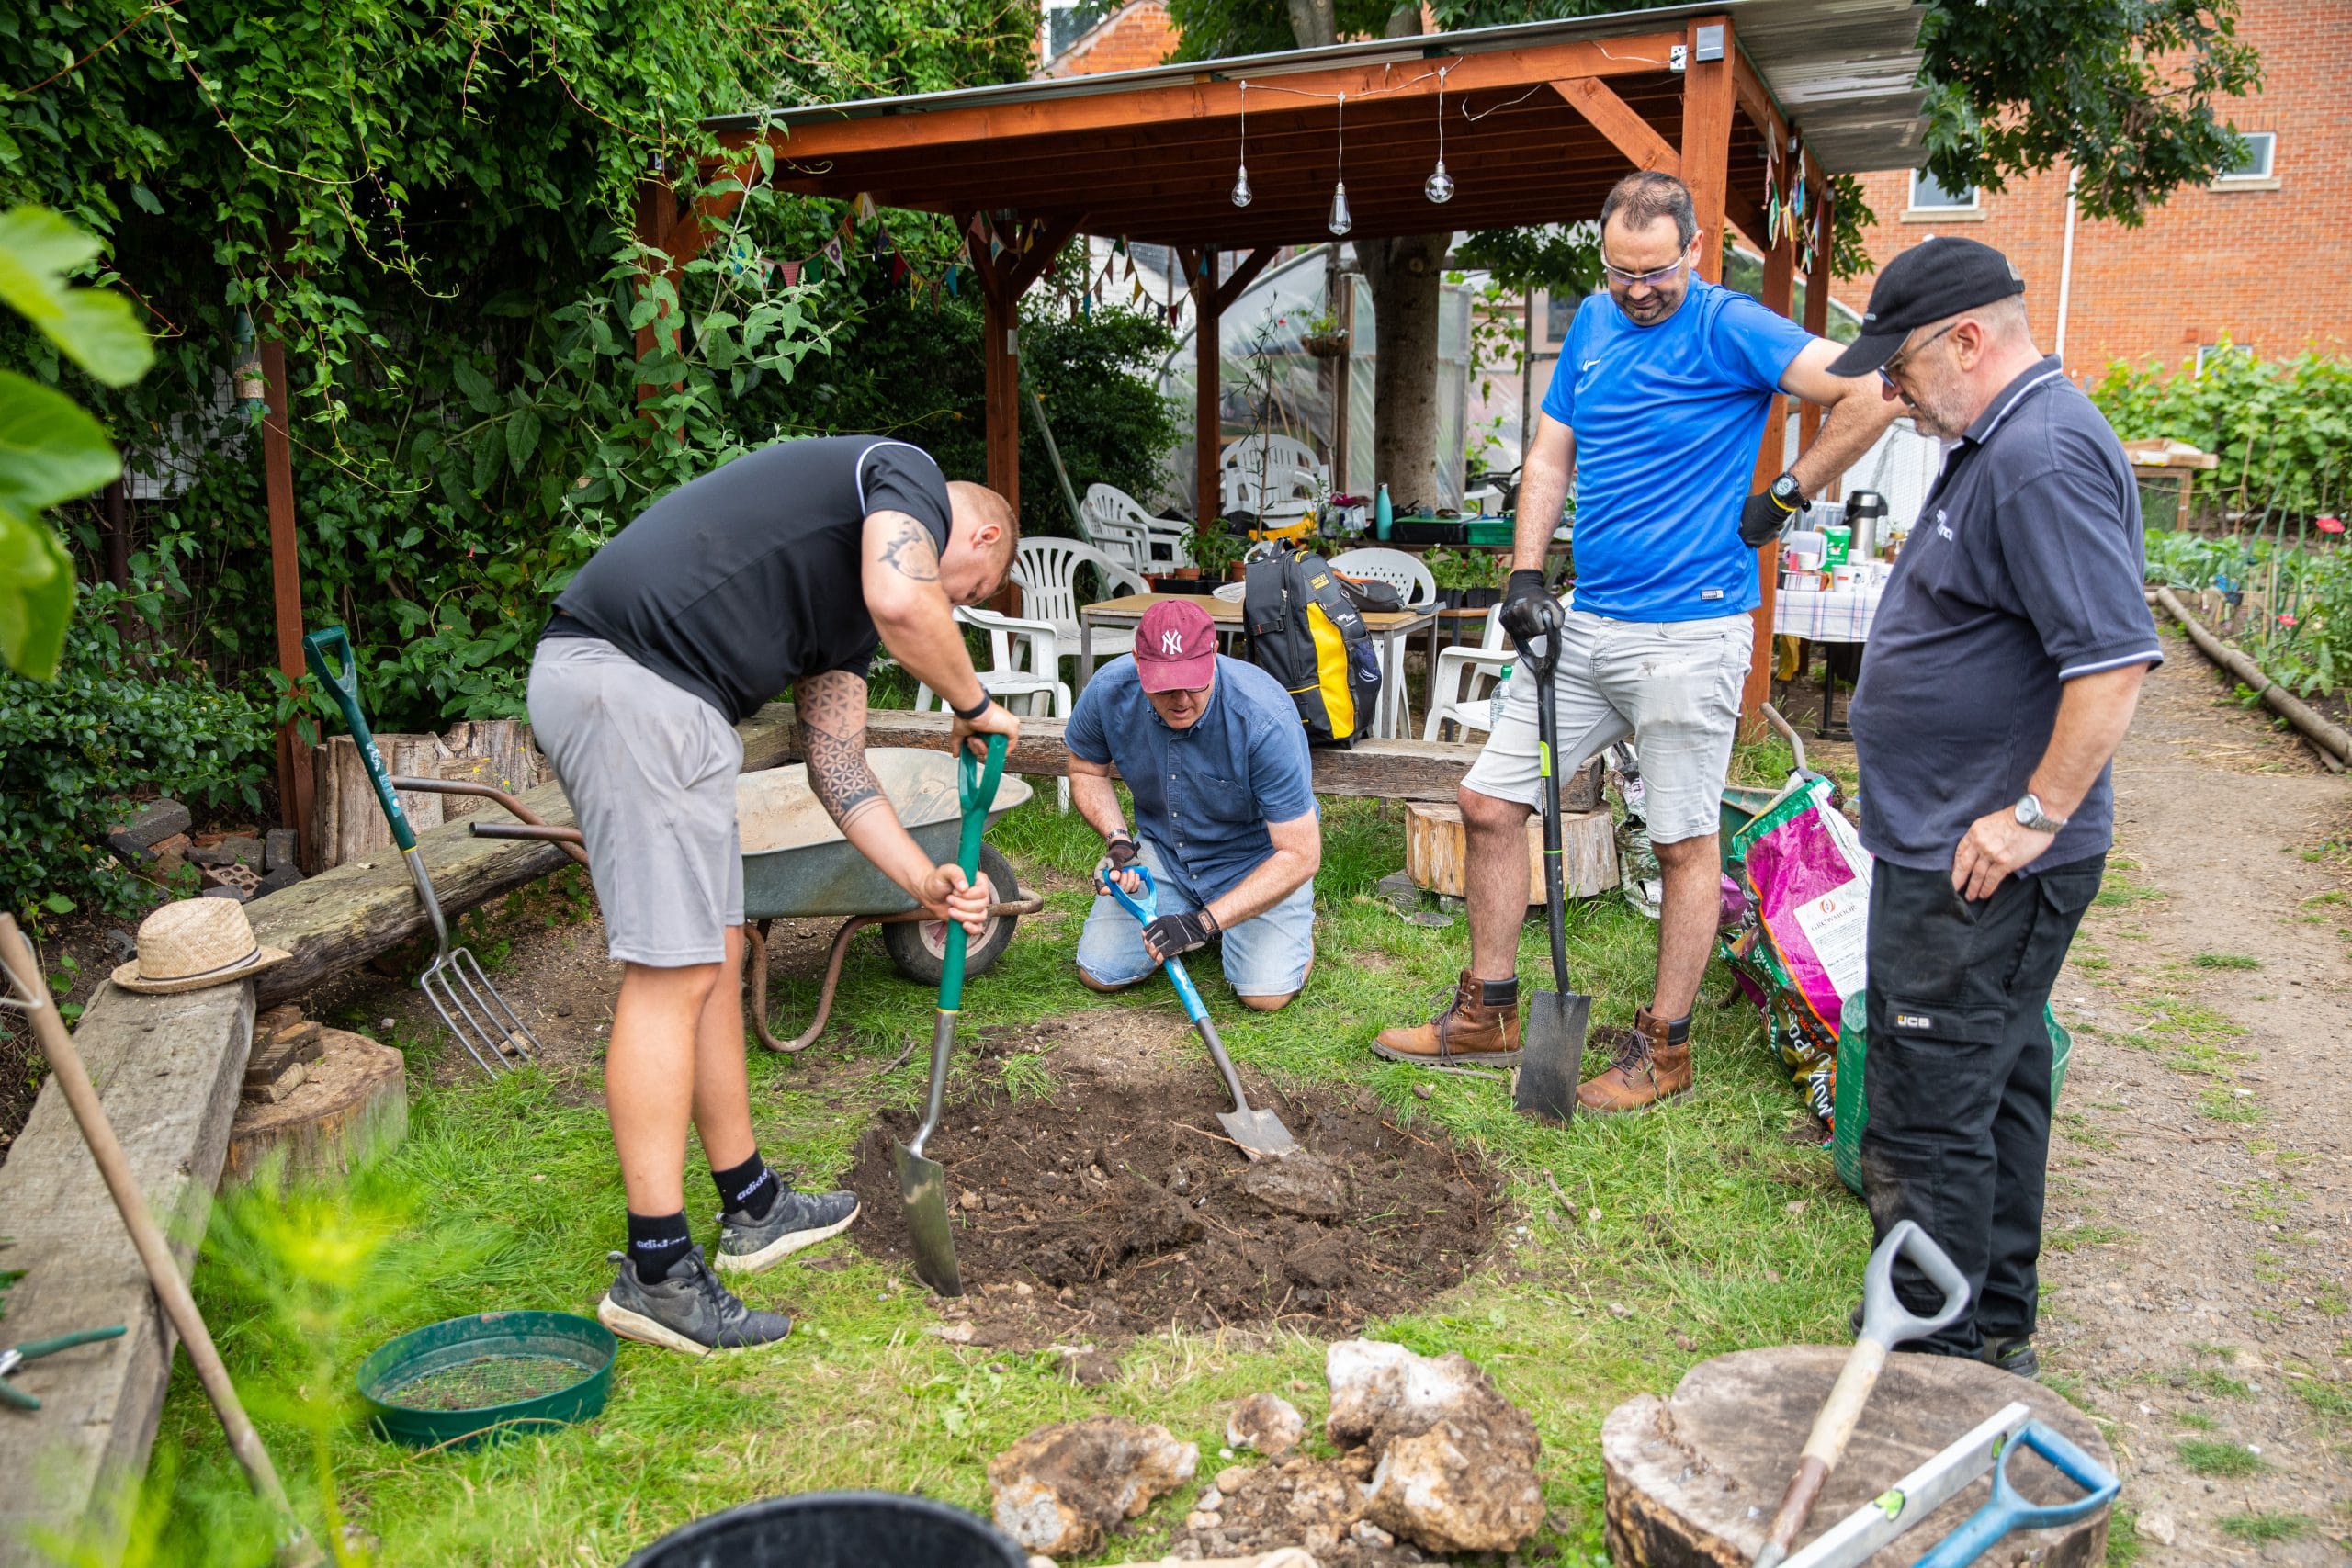 Four men are digging a hole in a lawn